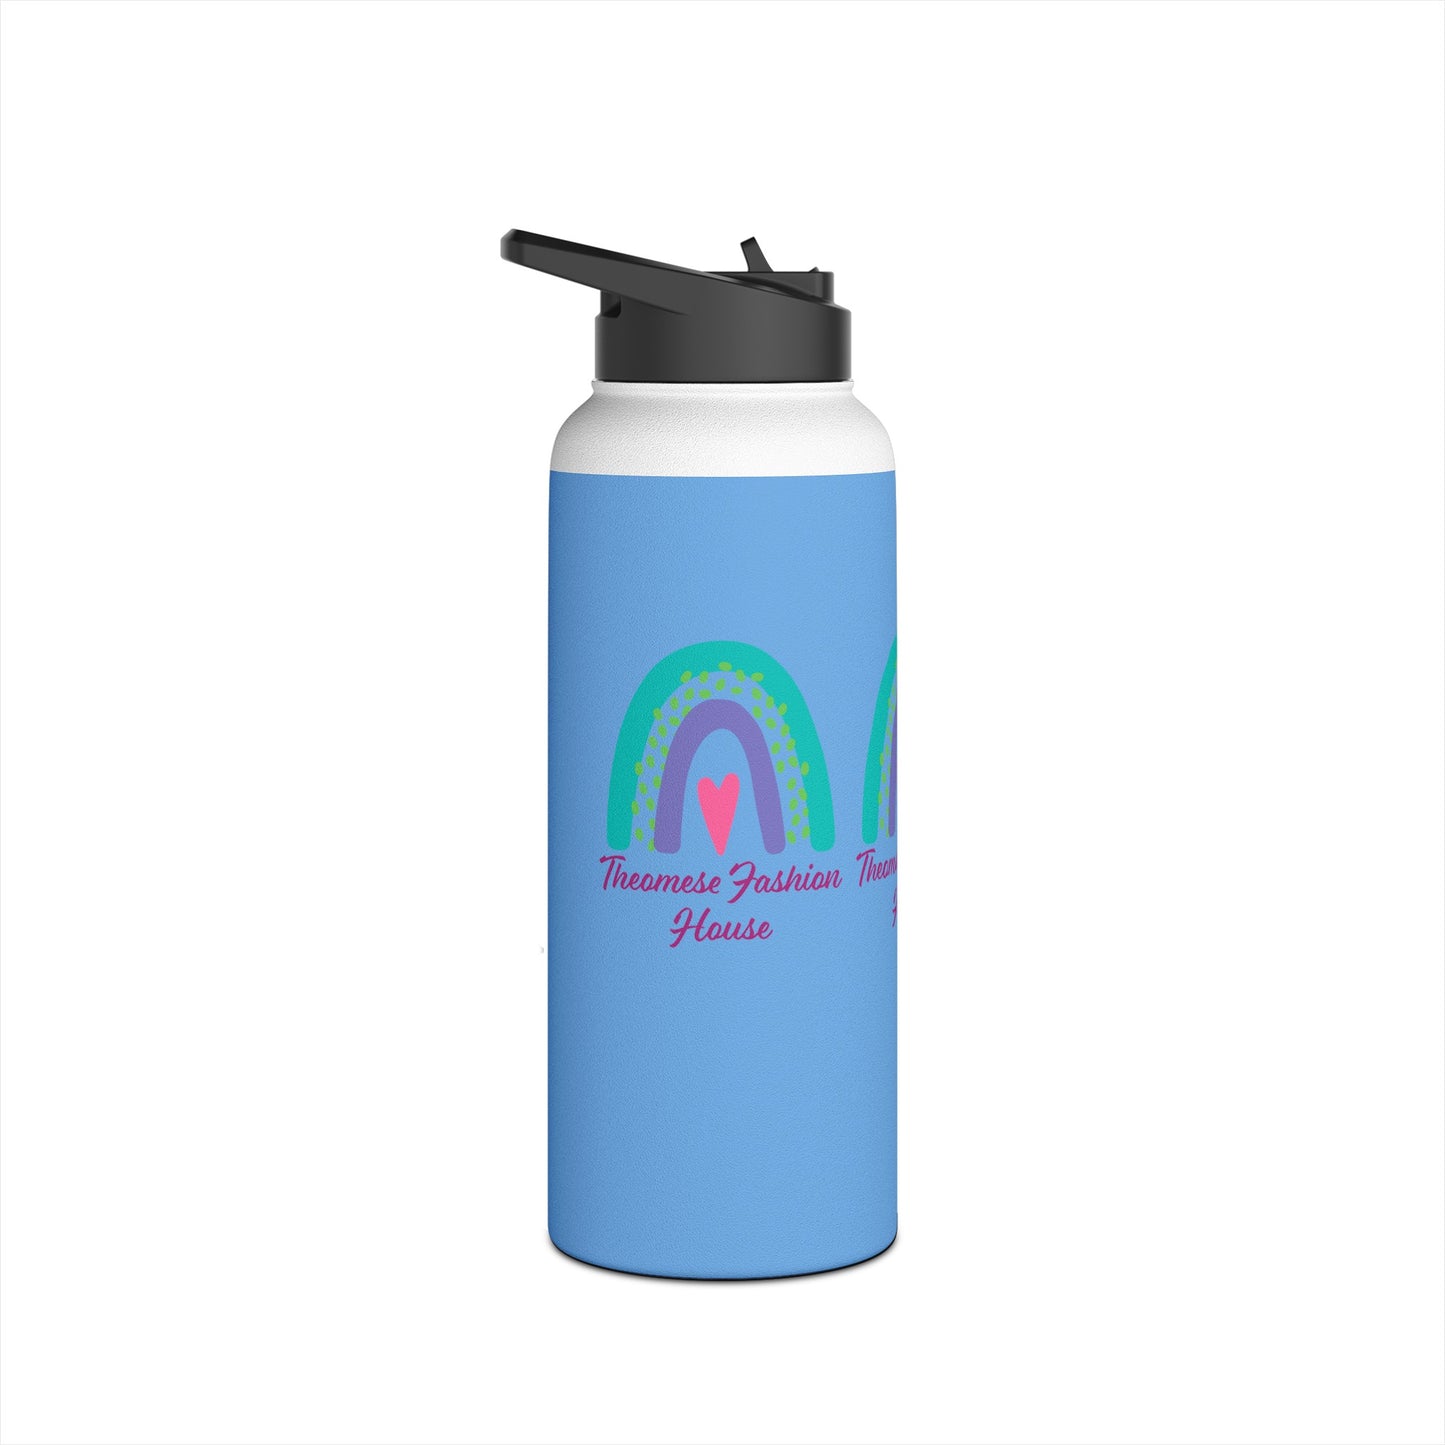 Signature-Stainless Steel Water Bottle, Standard Lid(Multi-Color)